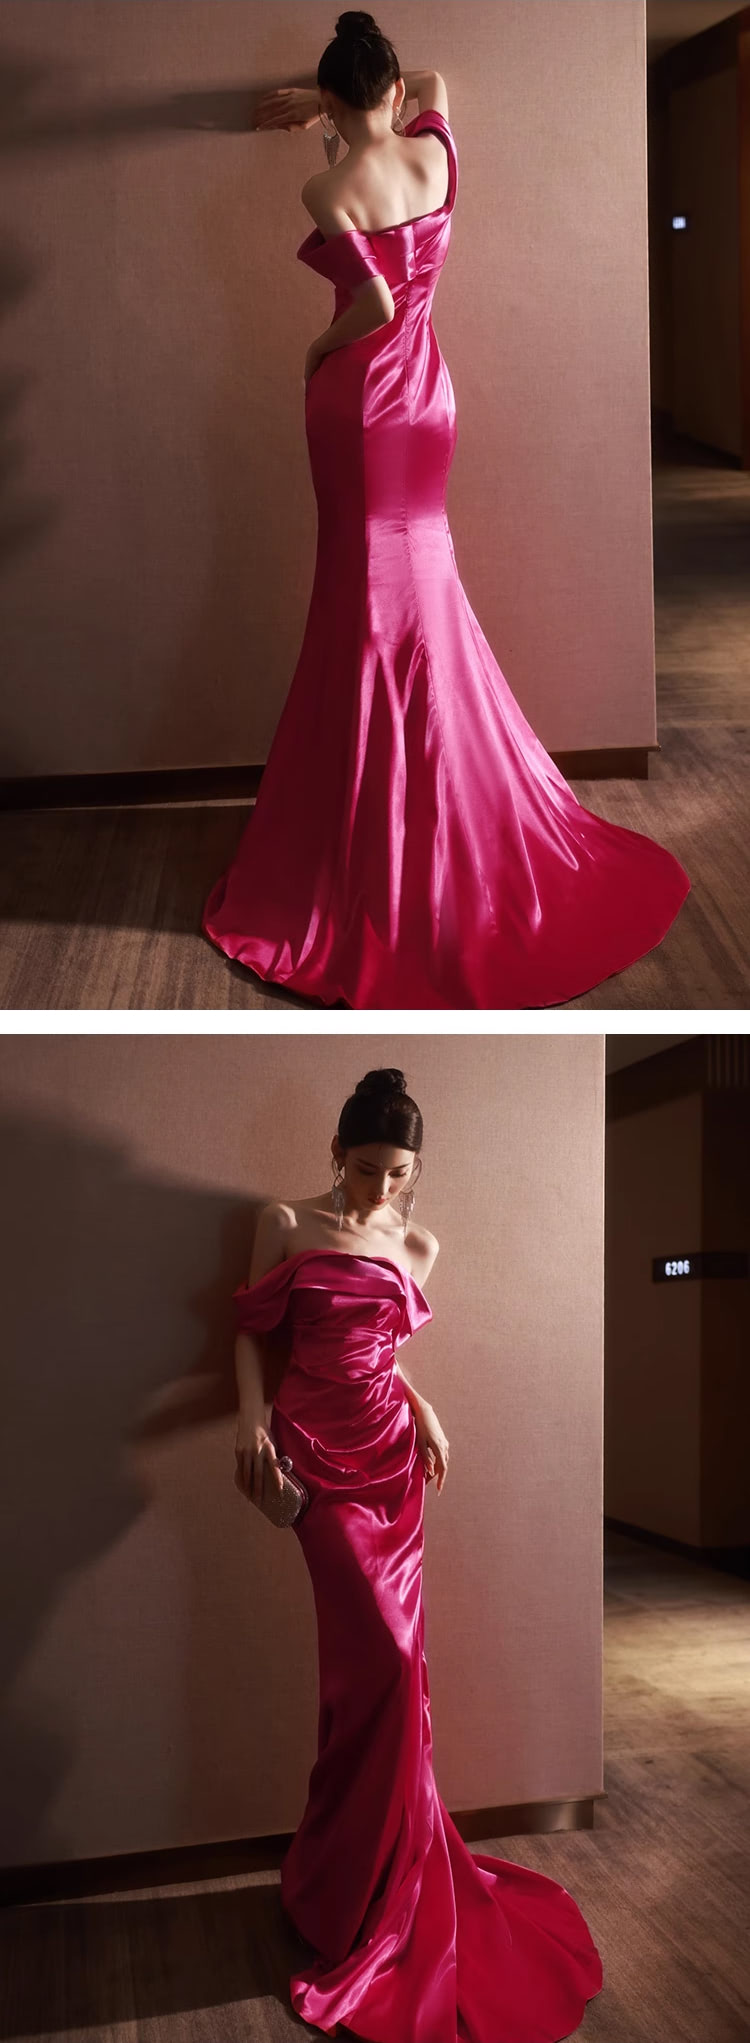 Sexy-Rose-Red-Off-Shoulder-Satin-Fishtail-Evening-Dress-Maxi-Gown12